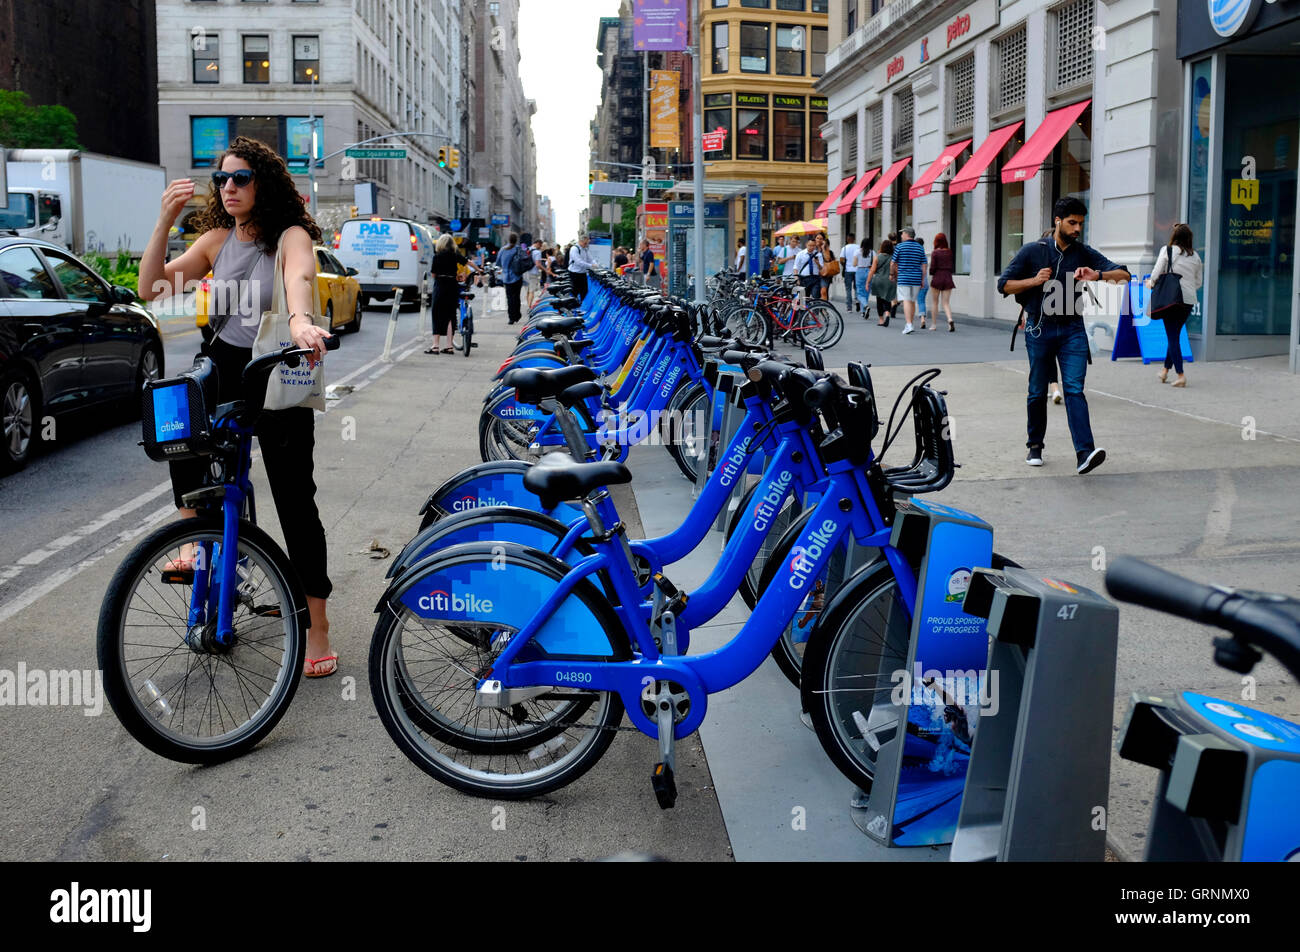 A female rider riding on a Citibike by a Citibike share station in Union Square.Manhattan.New York City,USA Stock Photo